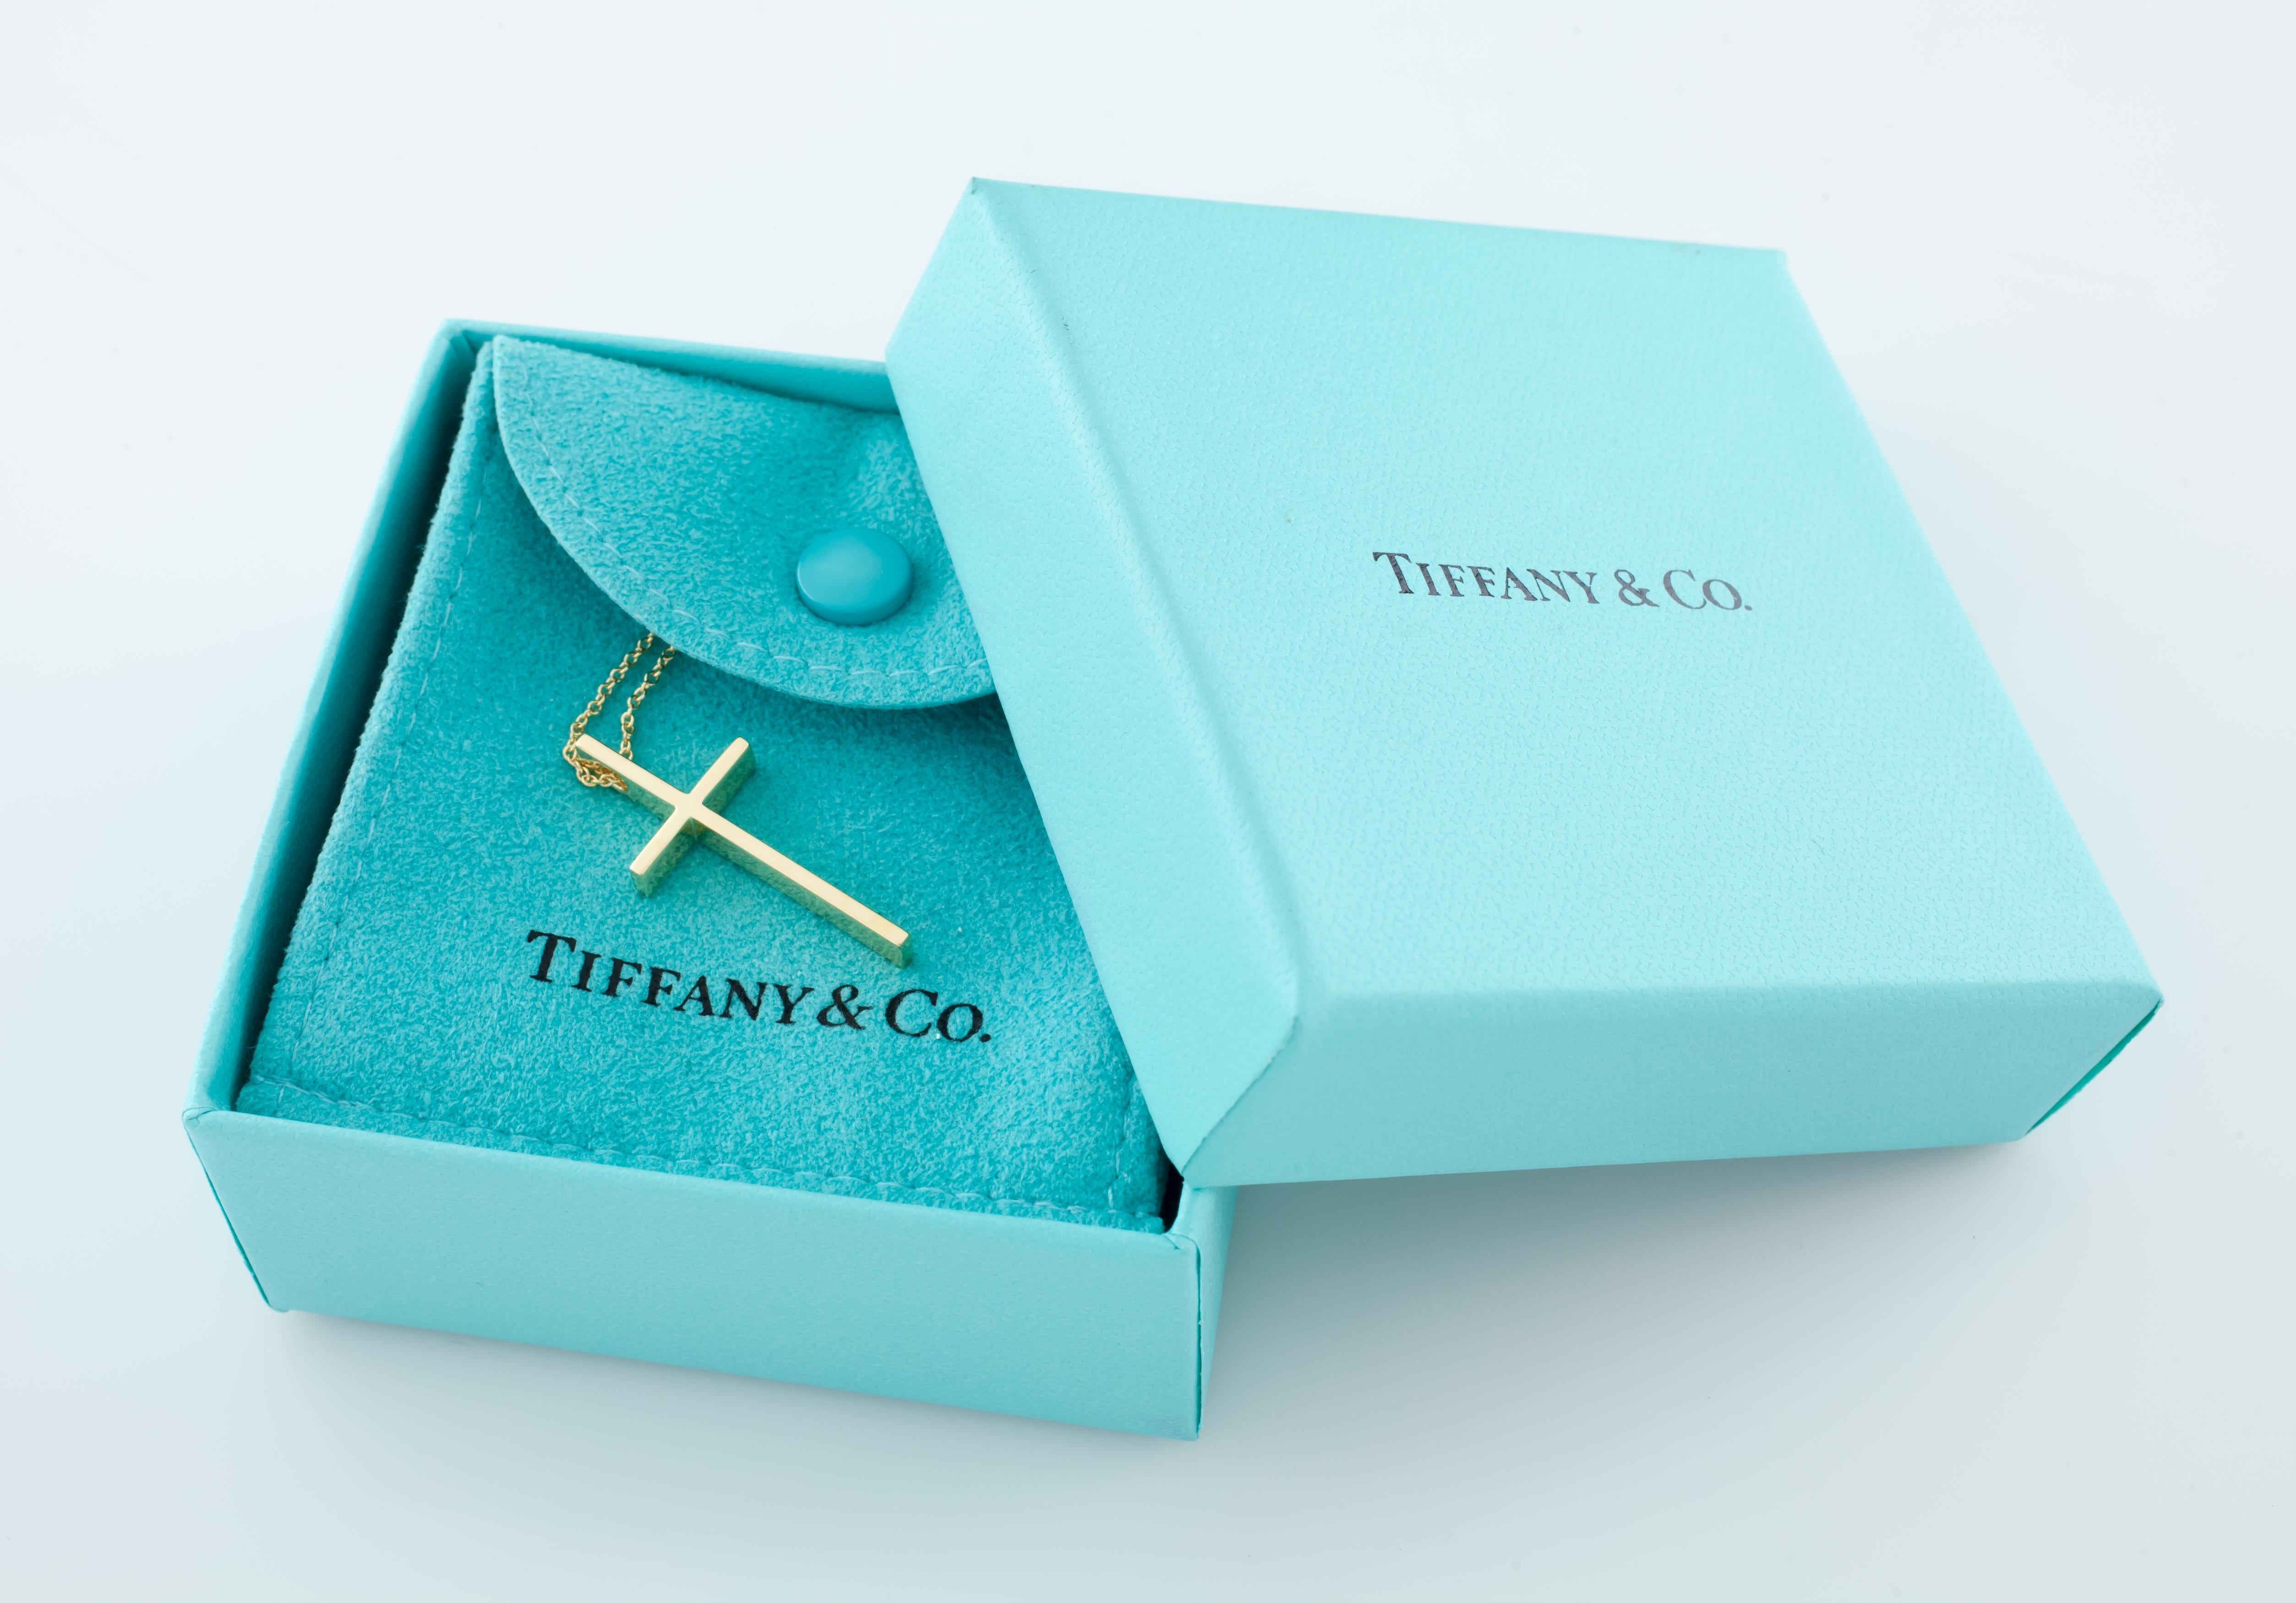 Tiffany & Co. Yellow Gold Metro Cross Pendant with Chain Box and Pouch 2